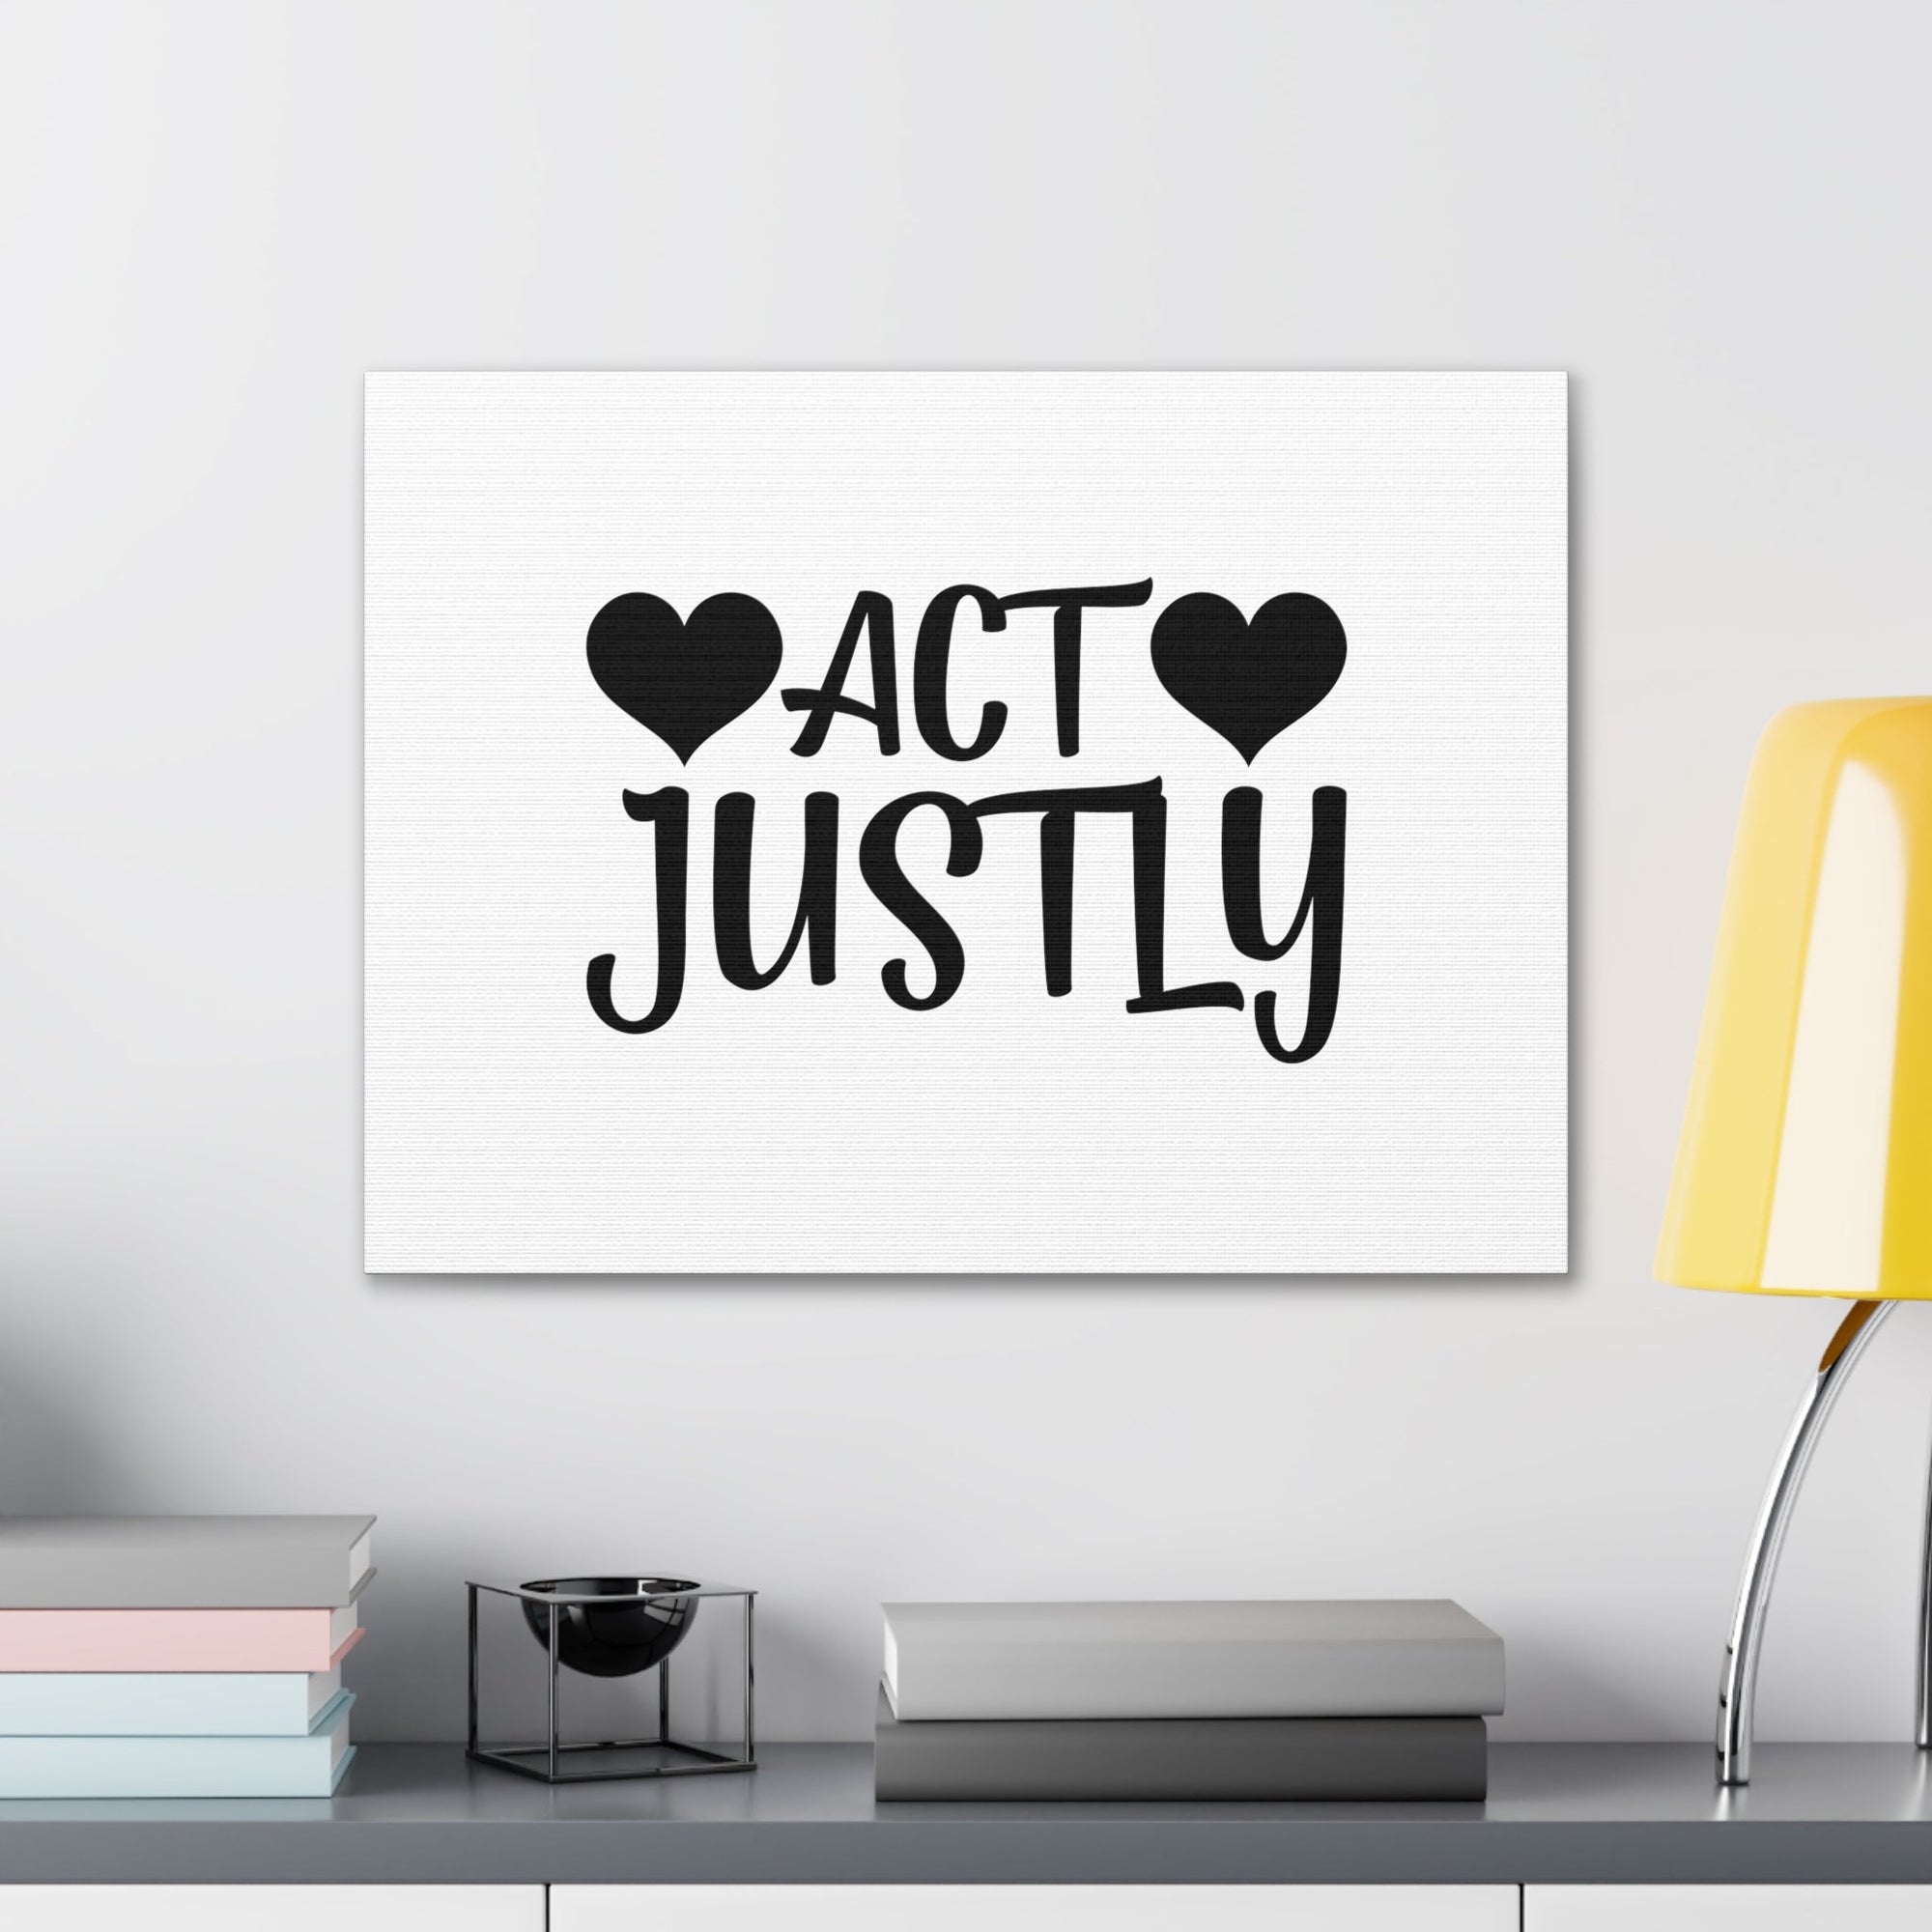 Scripture Walls Act Justly Micah 6:8 Heart Christian Wall Art Bible Verse Print Ready to Hang Unframed-Express Your Love Gifts